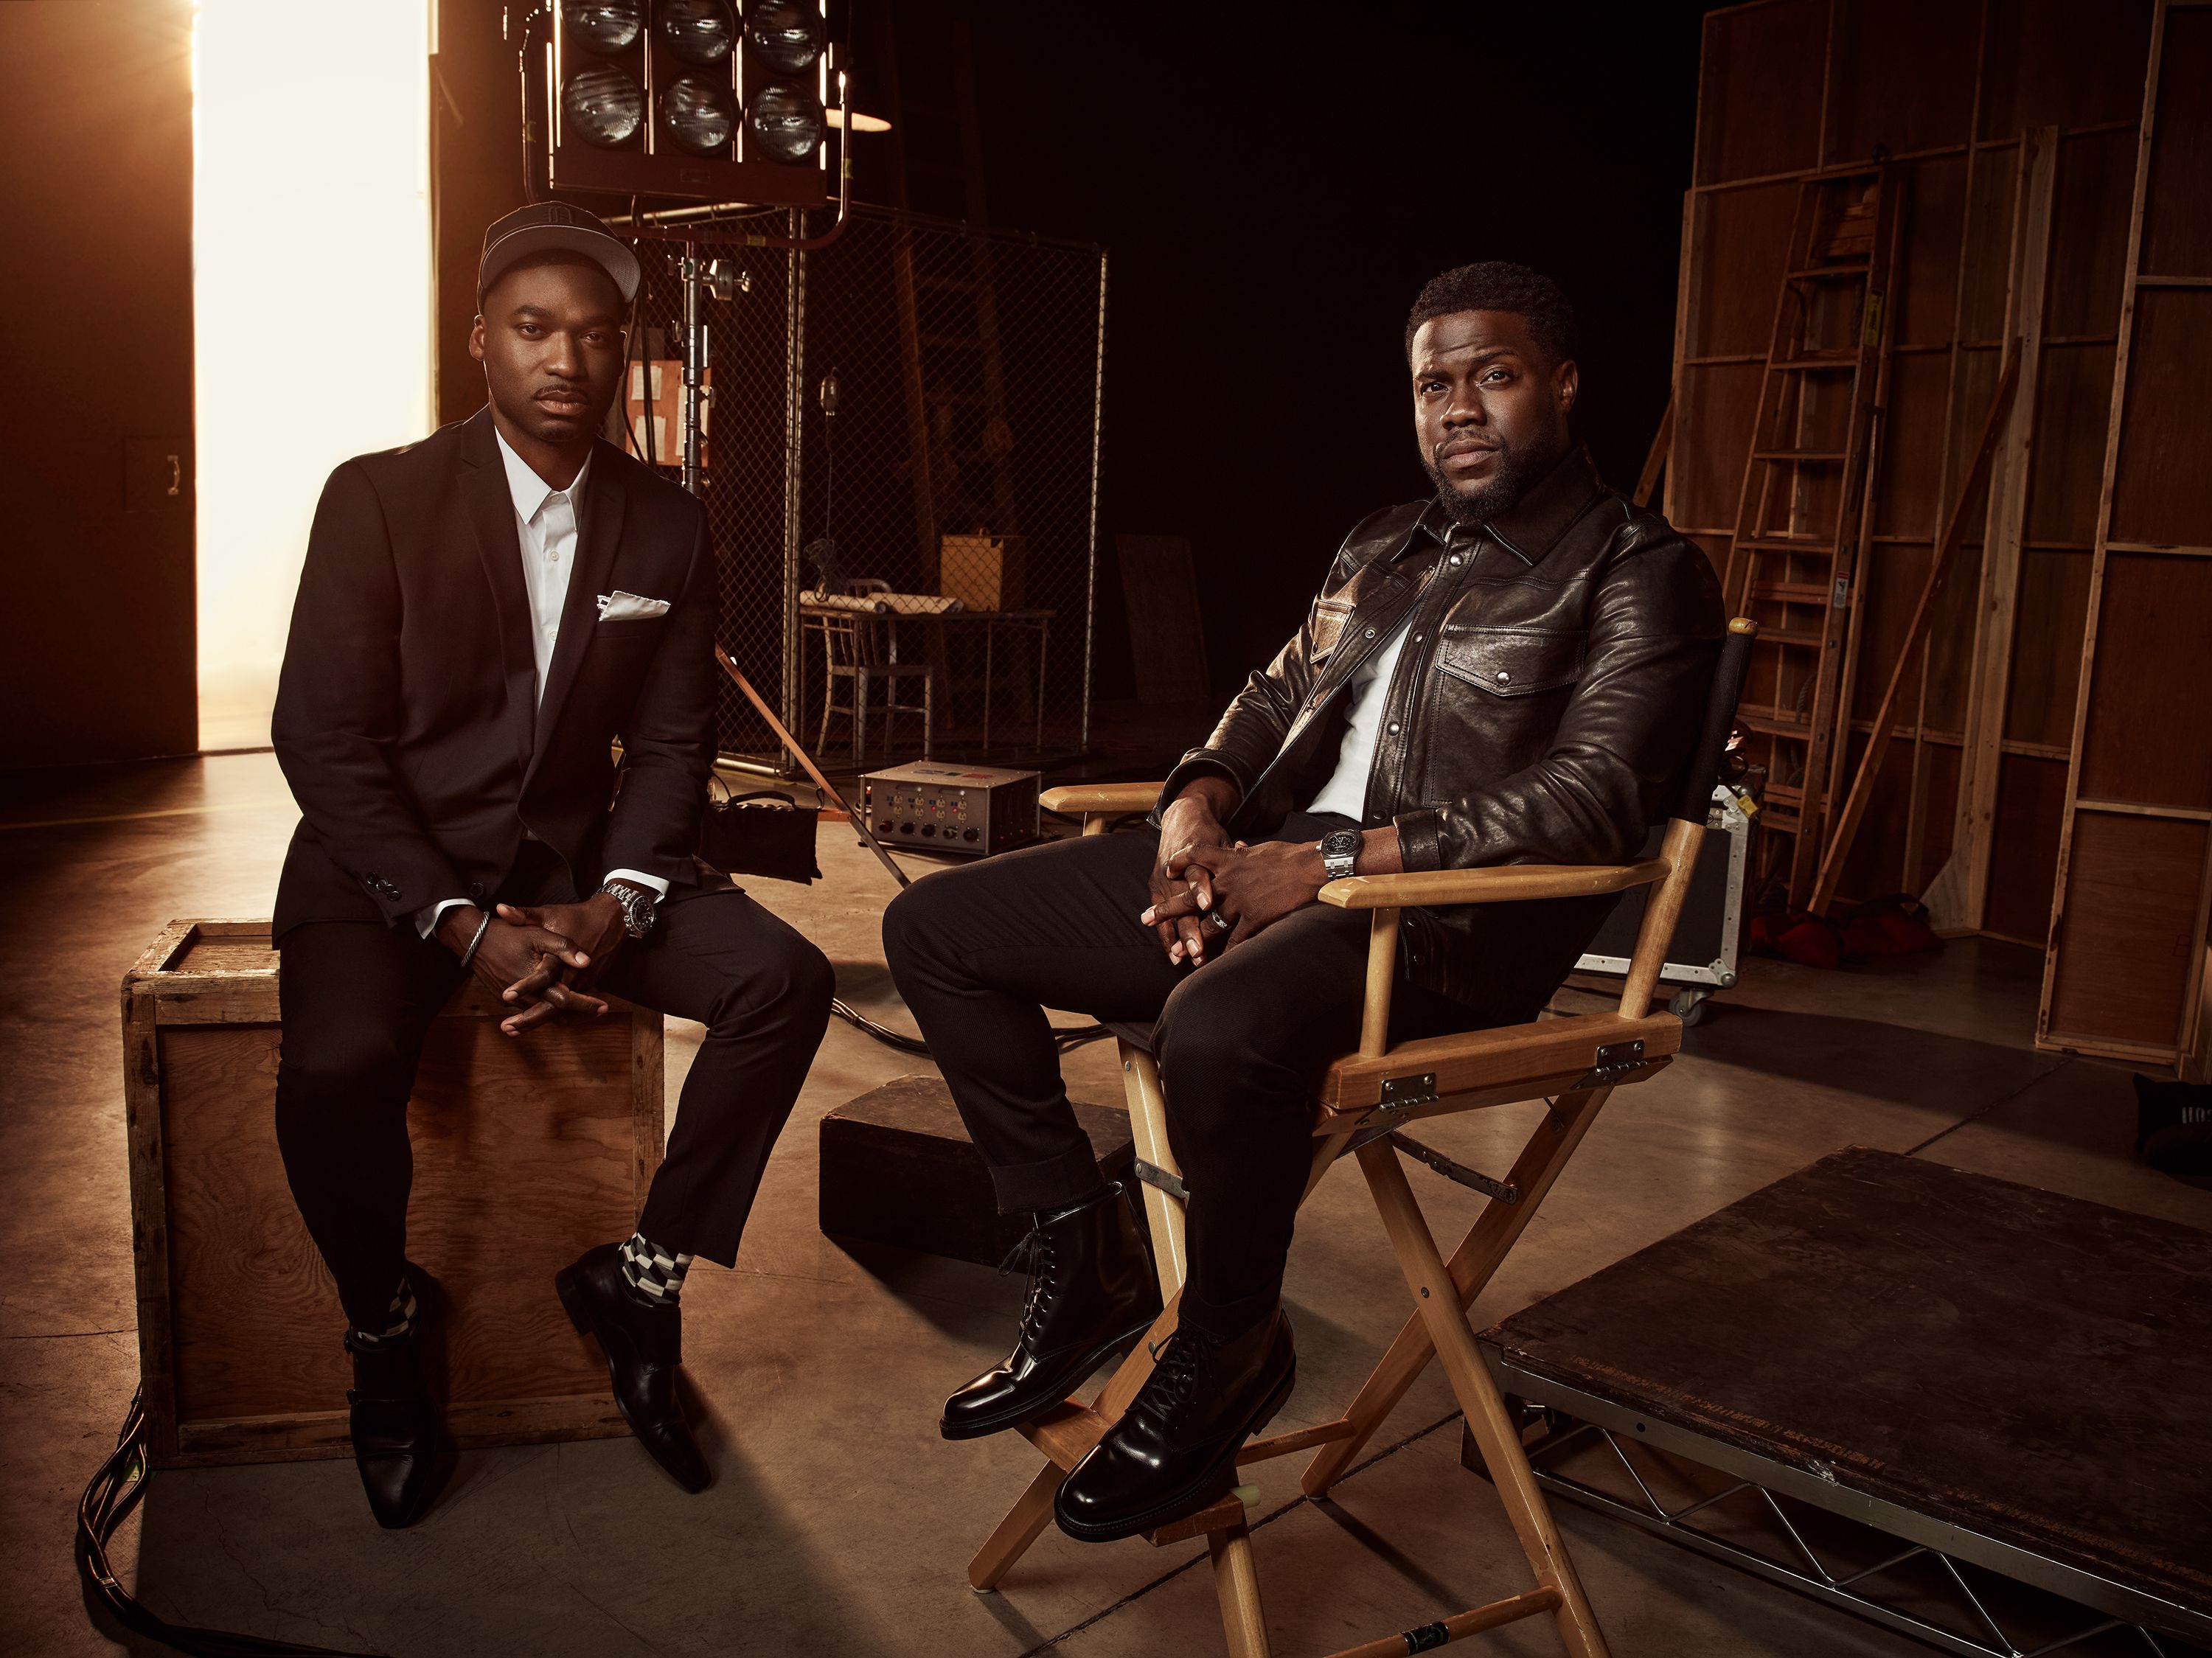 Kevin-Hart-Bryan-Smiley-heartbeat-productions-image